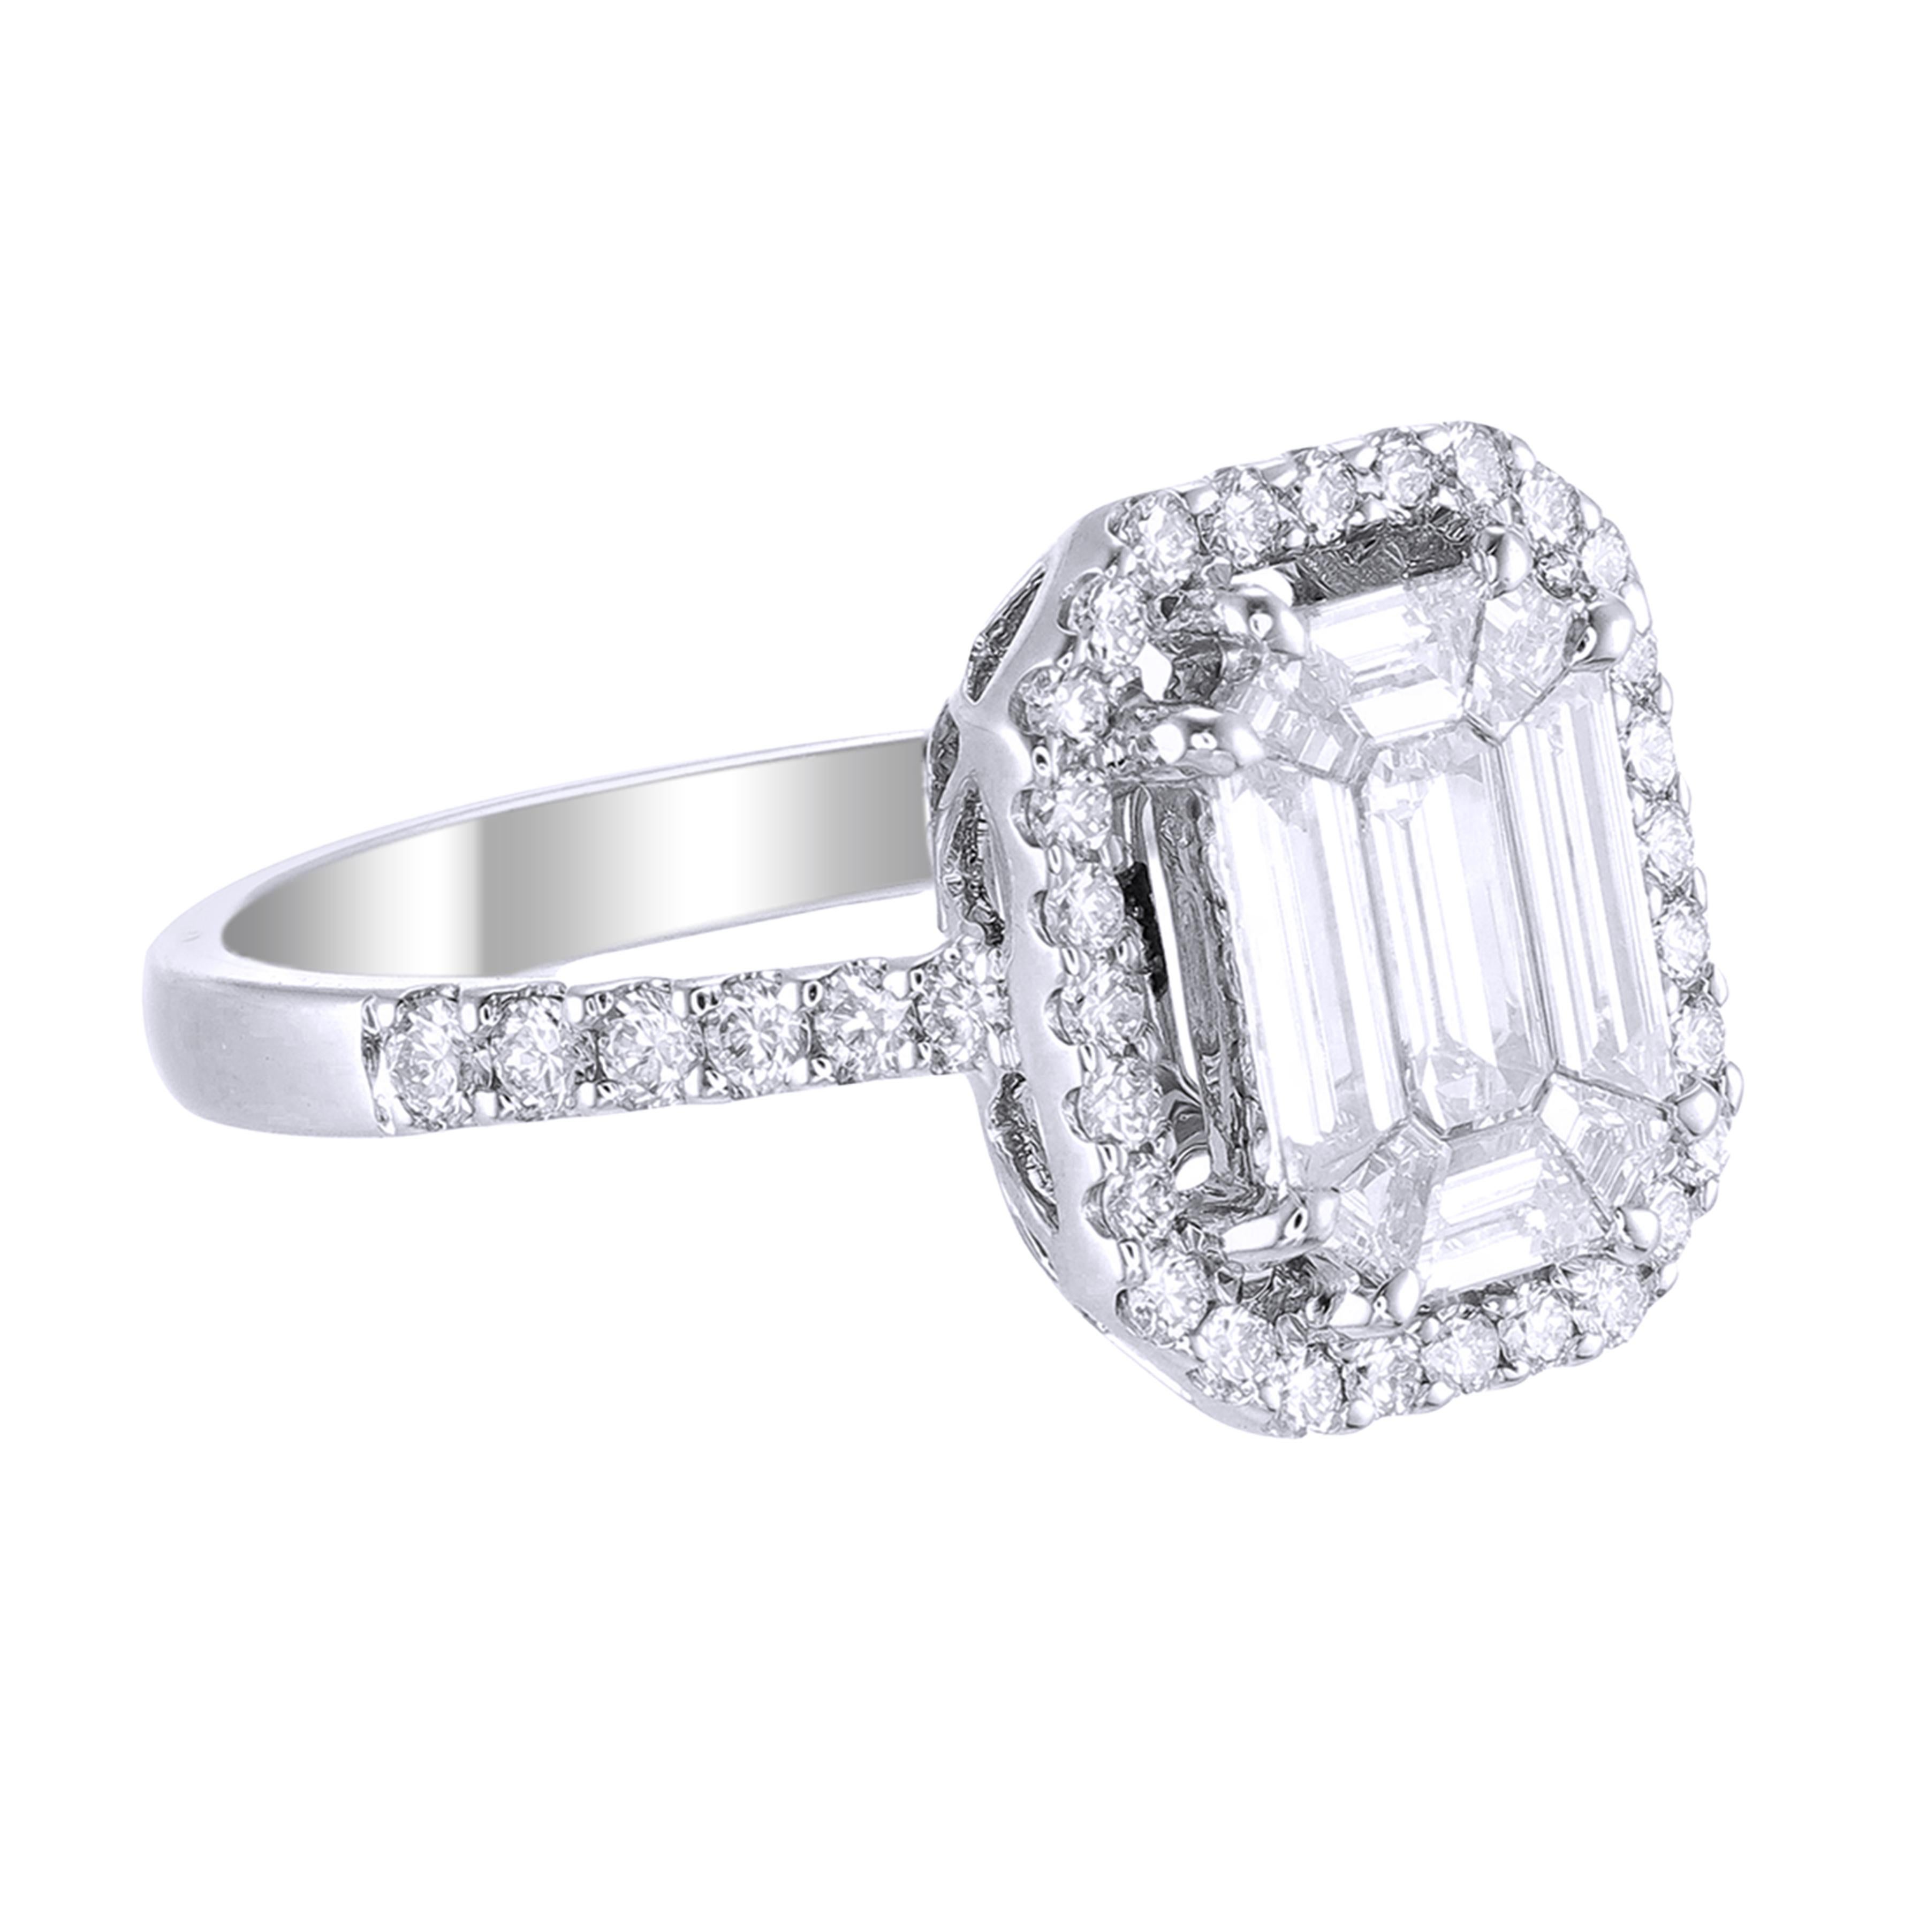 This diamond ring has a Emerald shape Illusion to create the look of a 2.50 to 3 carat single Emerald cut stone surrounded beautifully with brilliant round diamonds, Handcrafted in 18 kt white gold, the total diamond weight of this ring is 1.27